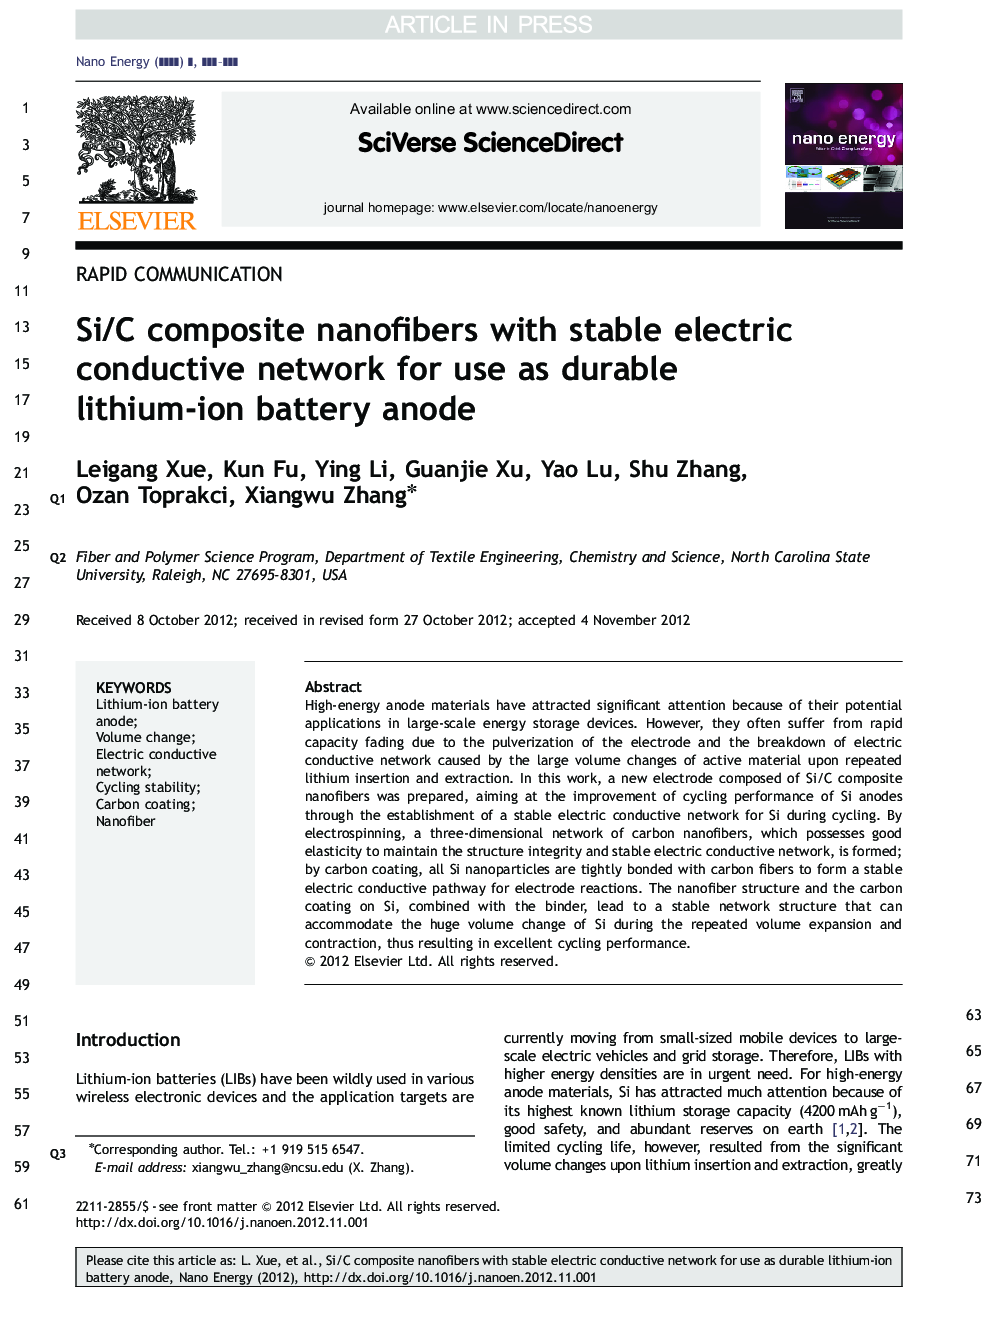 Si/C composite nanofibers with stable electric conductive network for use as durable lithium-ion battery anode